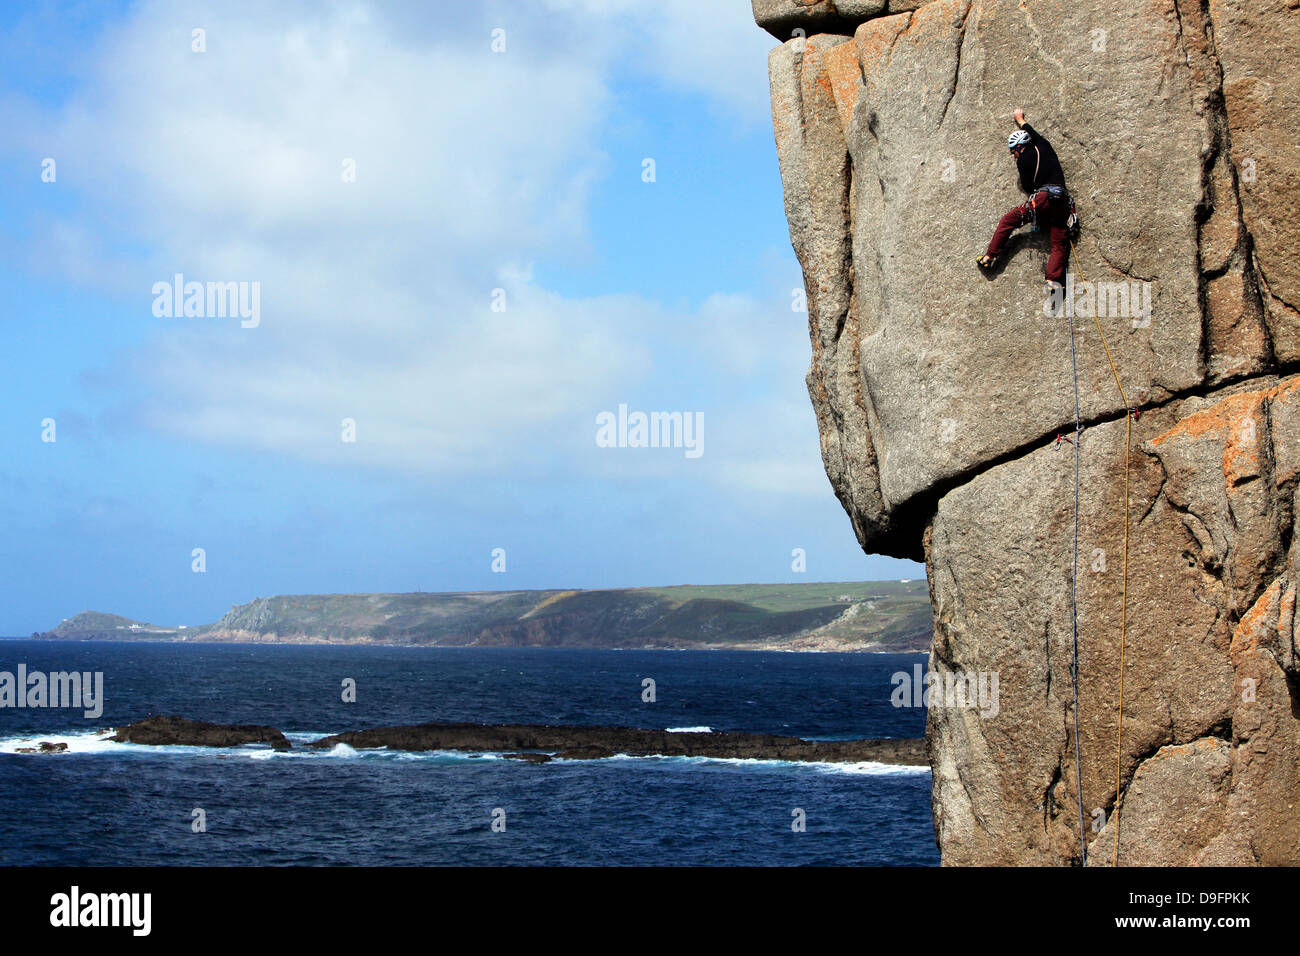 A climber scales cliffs at Sennen Cove, Cornwall, England, UK Stock Photo